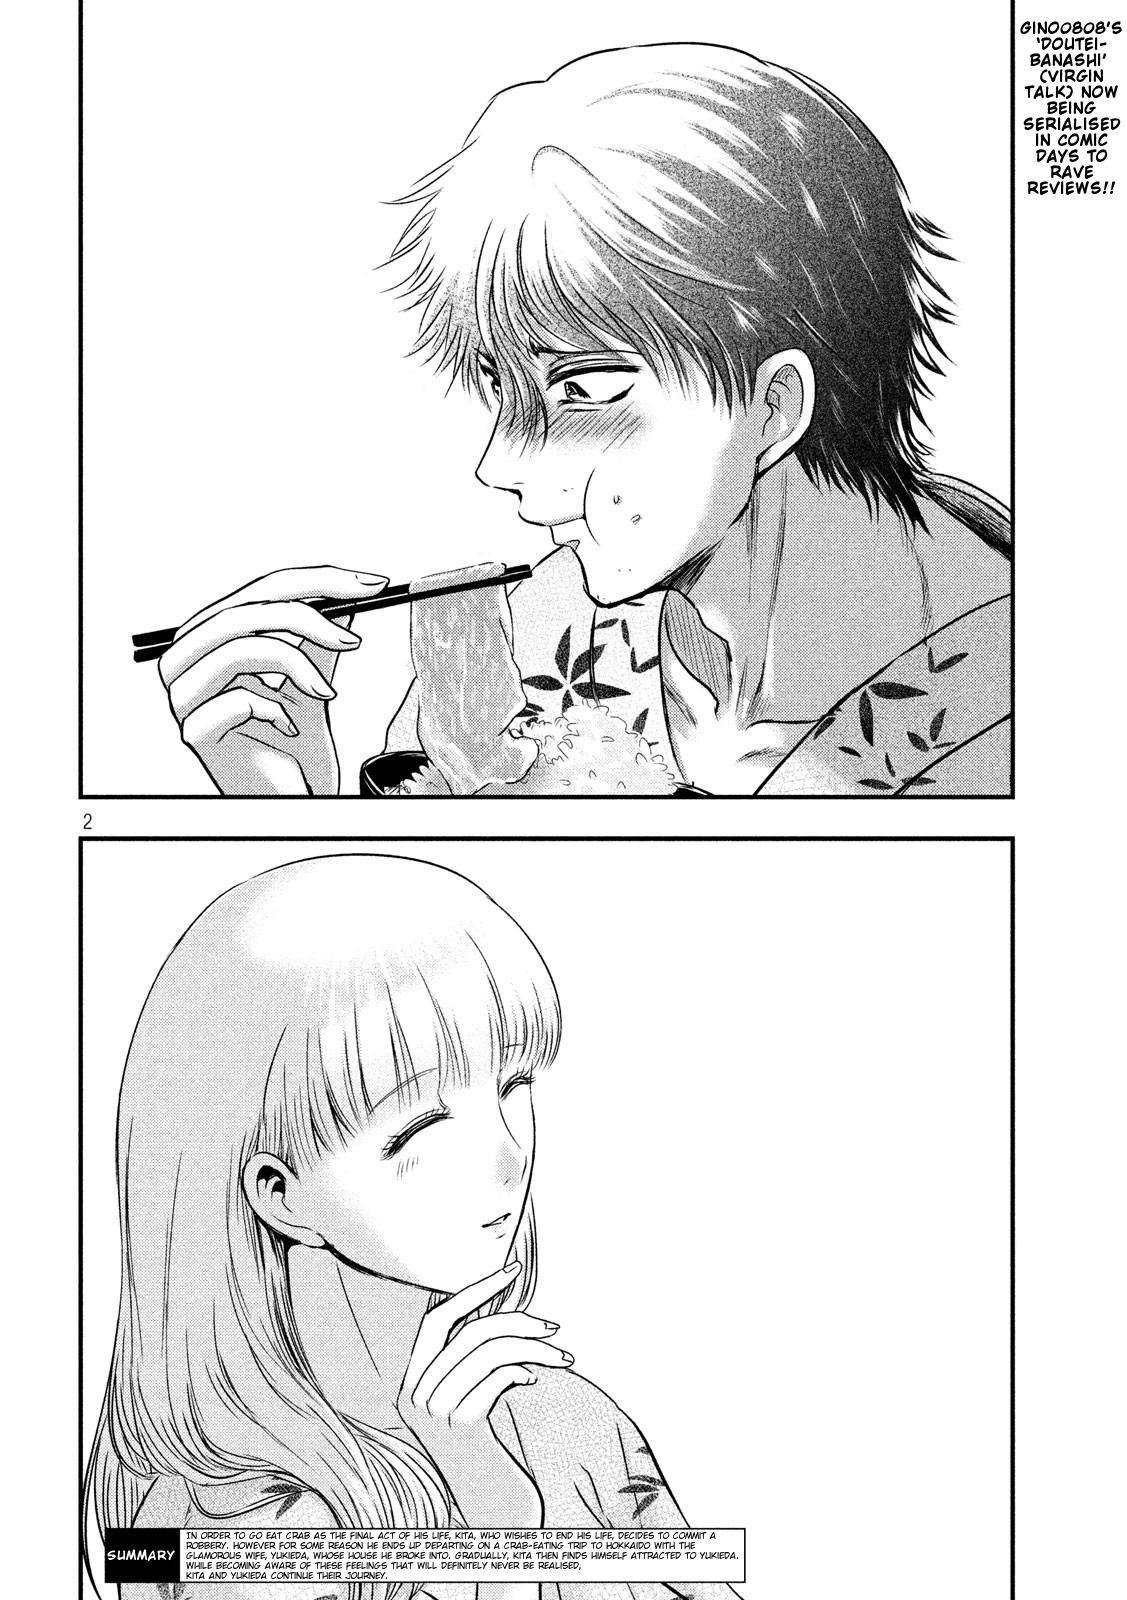 Eating Crab With A Yukionna - Page 2